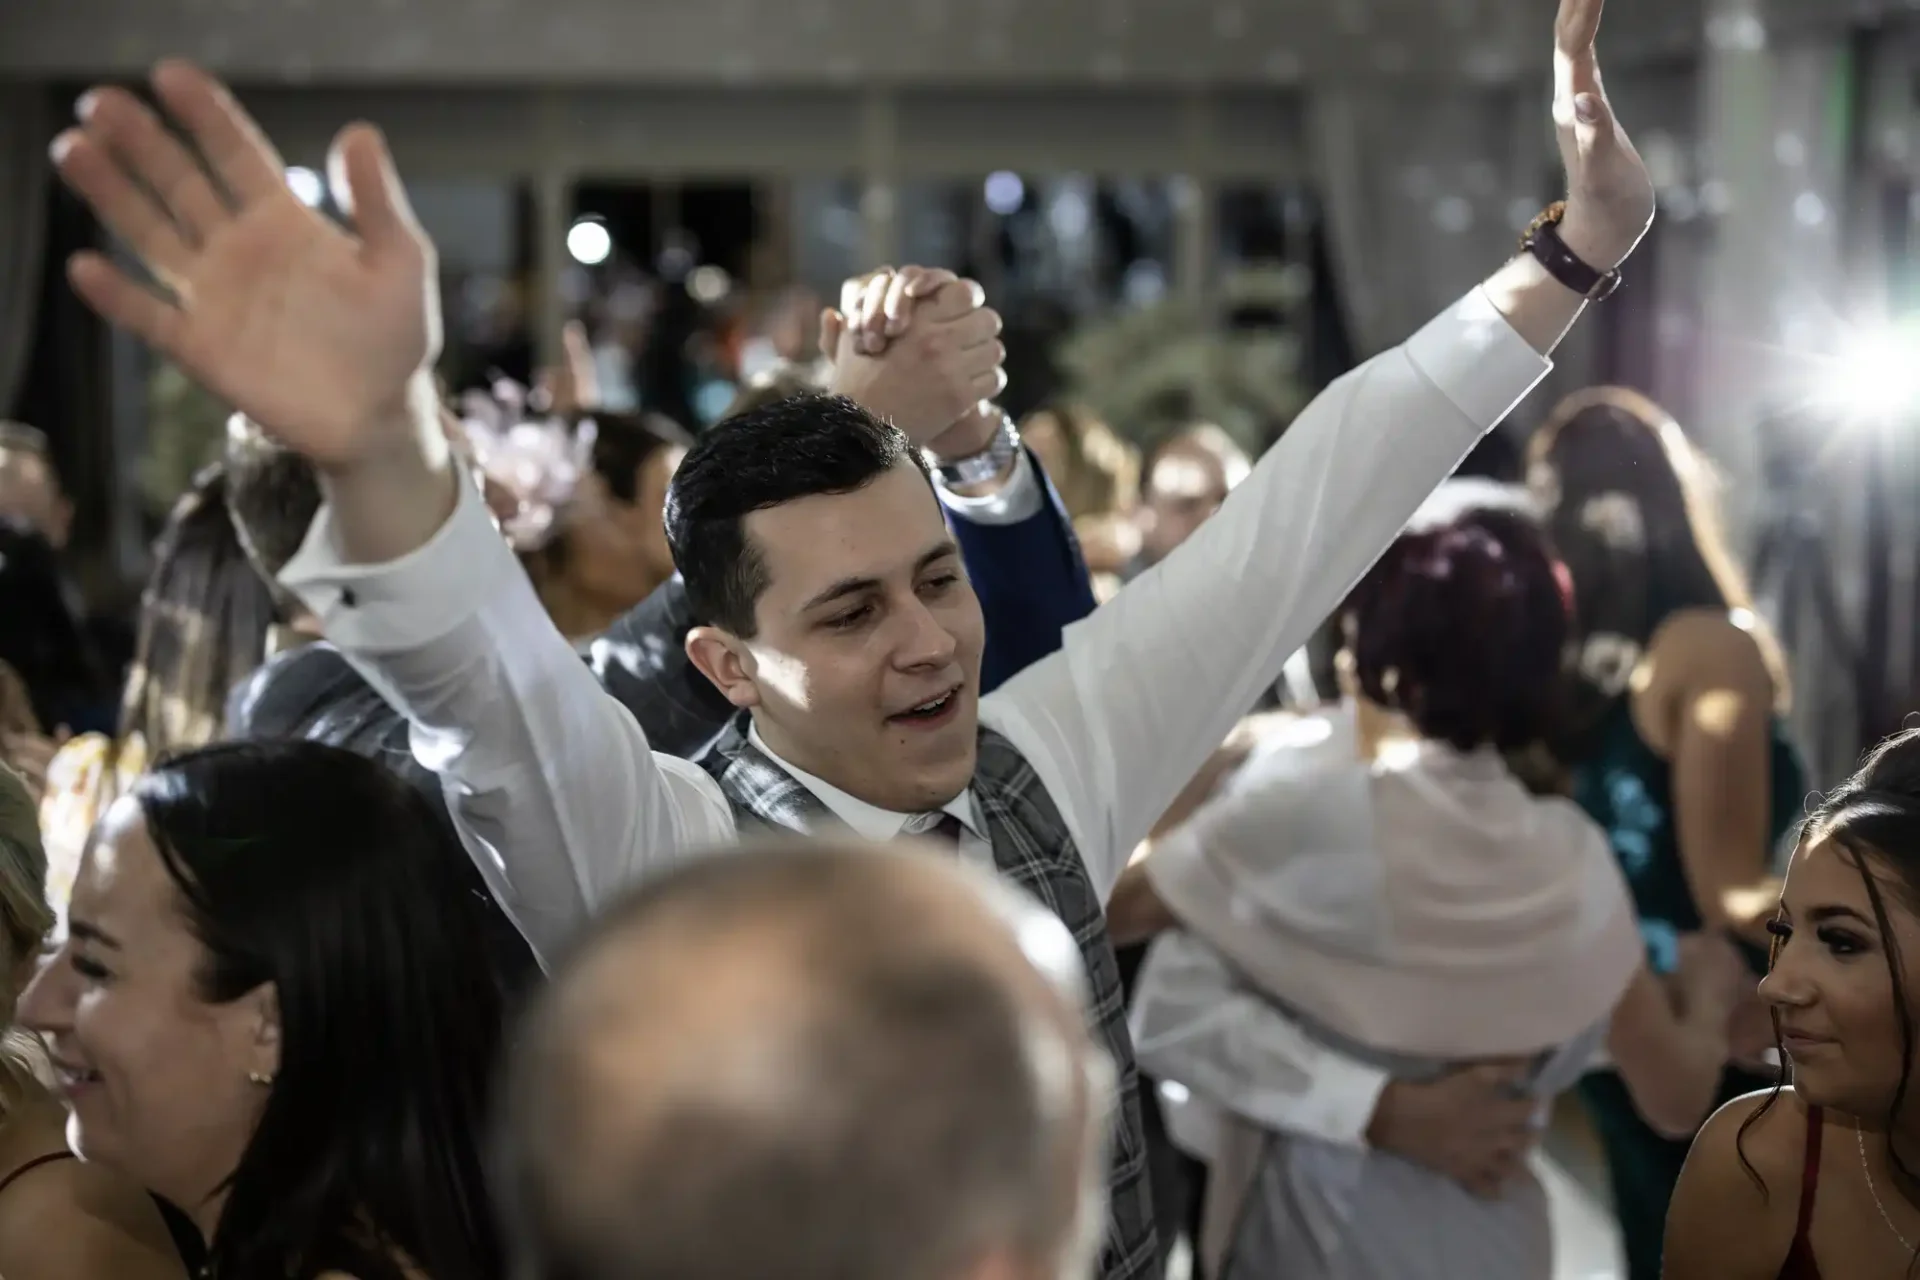 Man joyfully dancing with raised arms at a lively party surrounded by other guests.